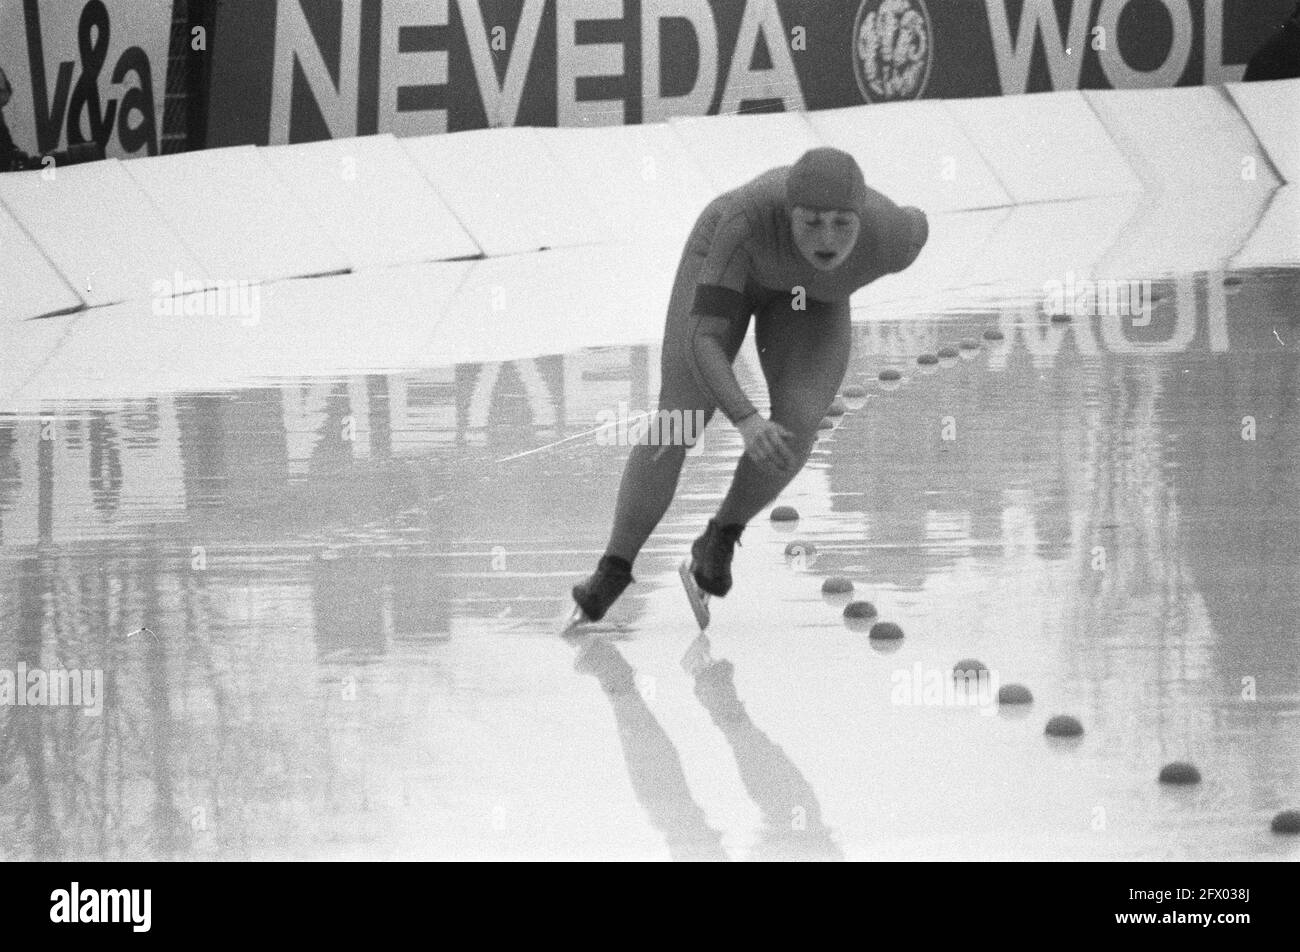 Skating competitions for the IJsselcup in Deventer. Ria Visser in action, November 23, 1980, skating, sports, The Netherlands, 20th century press agency photo, news to remember, documentary, historic photography 1945-1990, visual stories, human history of the Twentieth Century, capturing moments in time Stock Photo